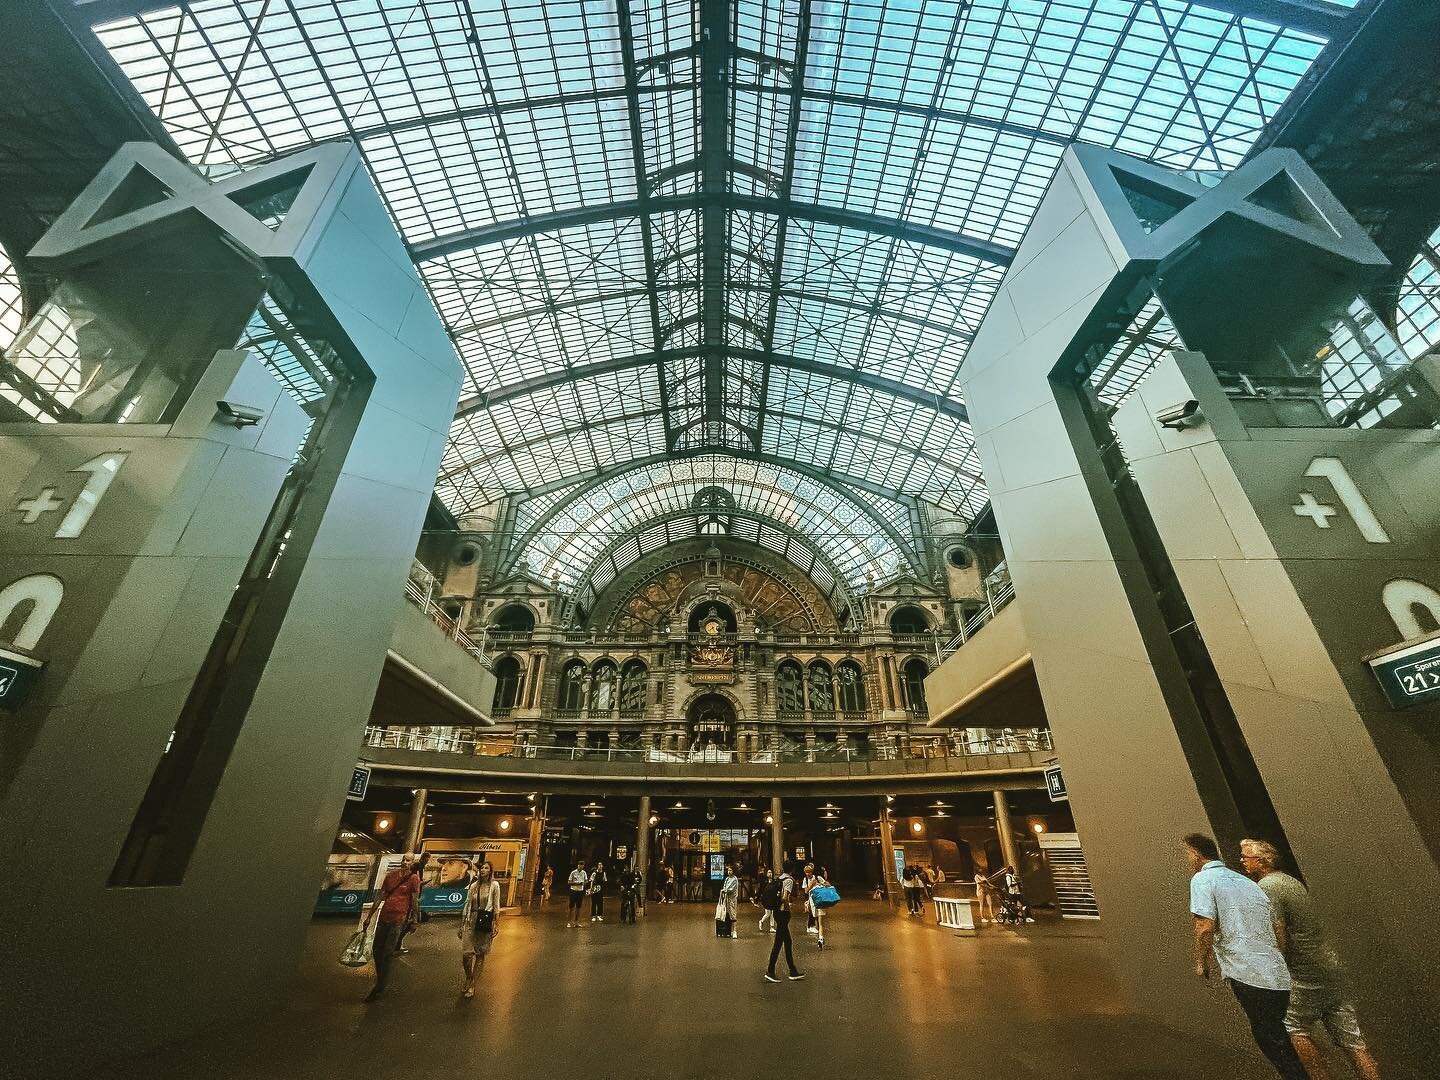 Antwerp Central Station

#belgium #antwerp #antwerpcentral #hiking #travel #backpacking #solotraveller #iphone #travelphotography #train #architecture  #hikingadventure #photography  #picoftheday #travel_photography #architecturephotography #landscap